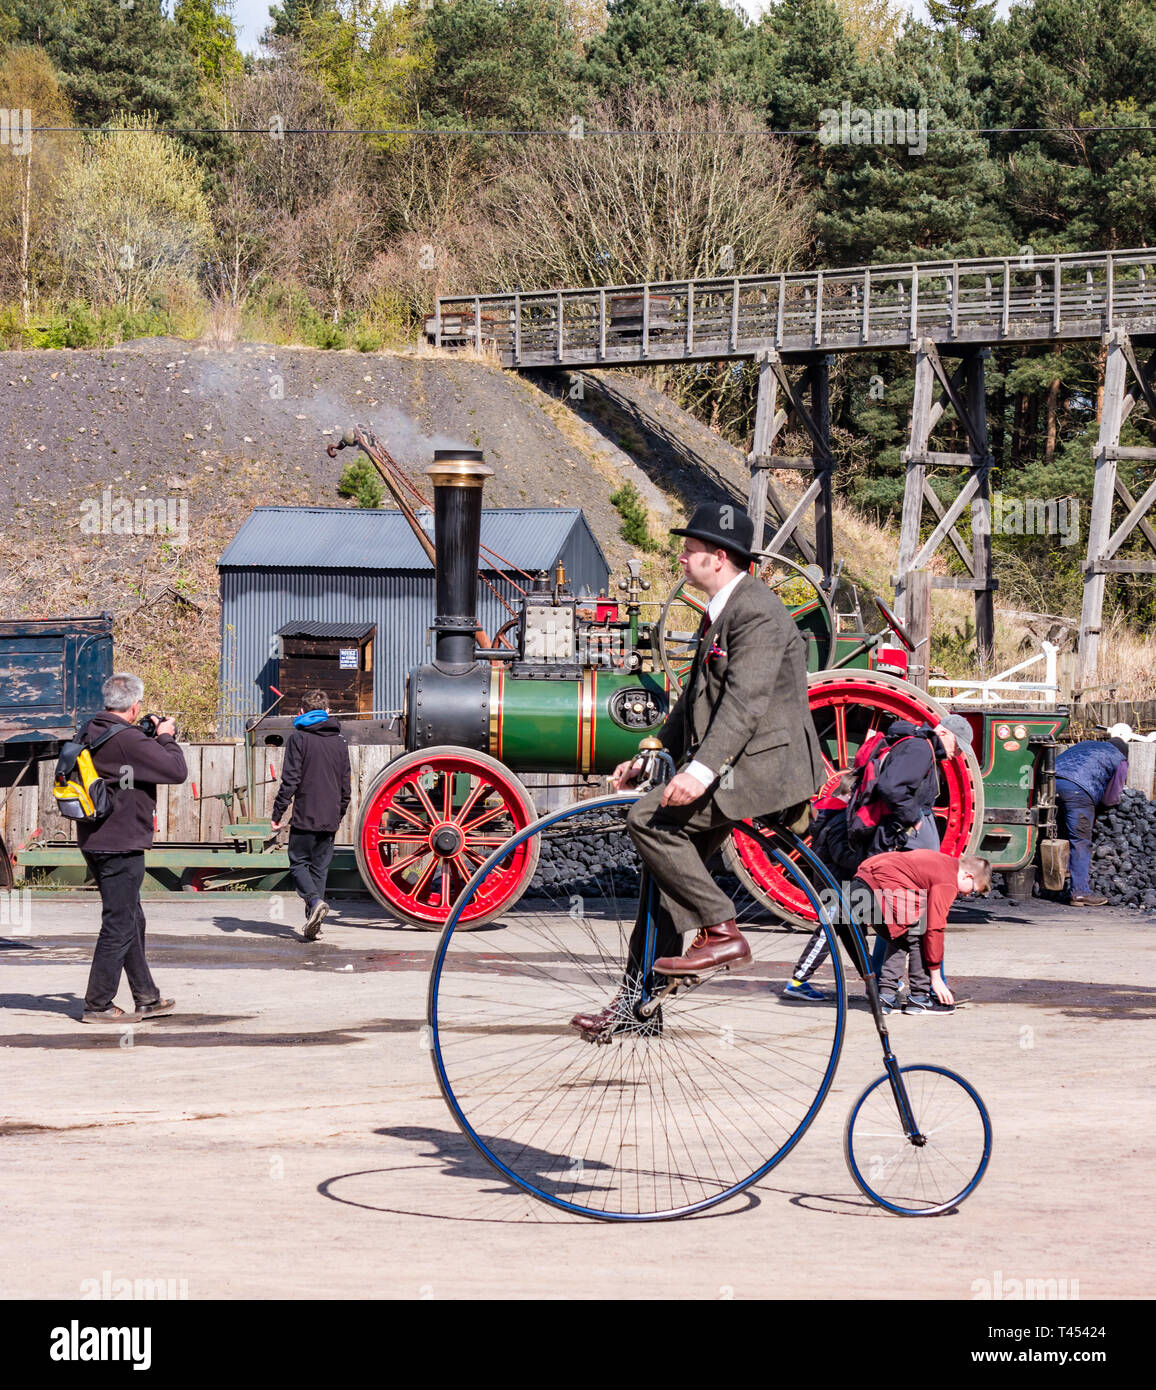 Beamish Museum, Beamish, Durham County, England, United Kingdom, 13 April 2019. Beamish Steam Day: Man in vintage costume riding a penny farthing bicycle with a vintage Clayton & Shuttleworth steam traction engine on display at Beamish Living Museum Stock Photo